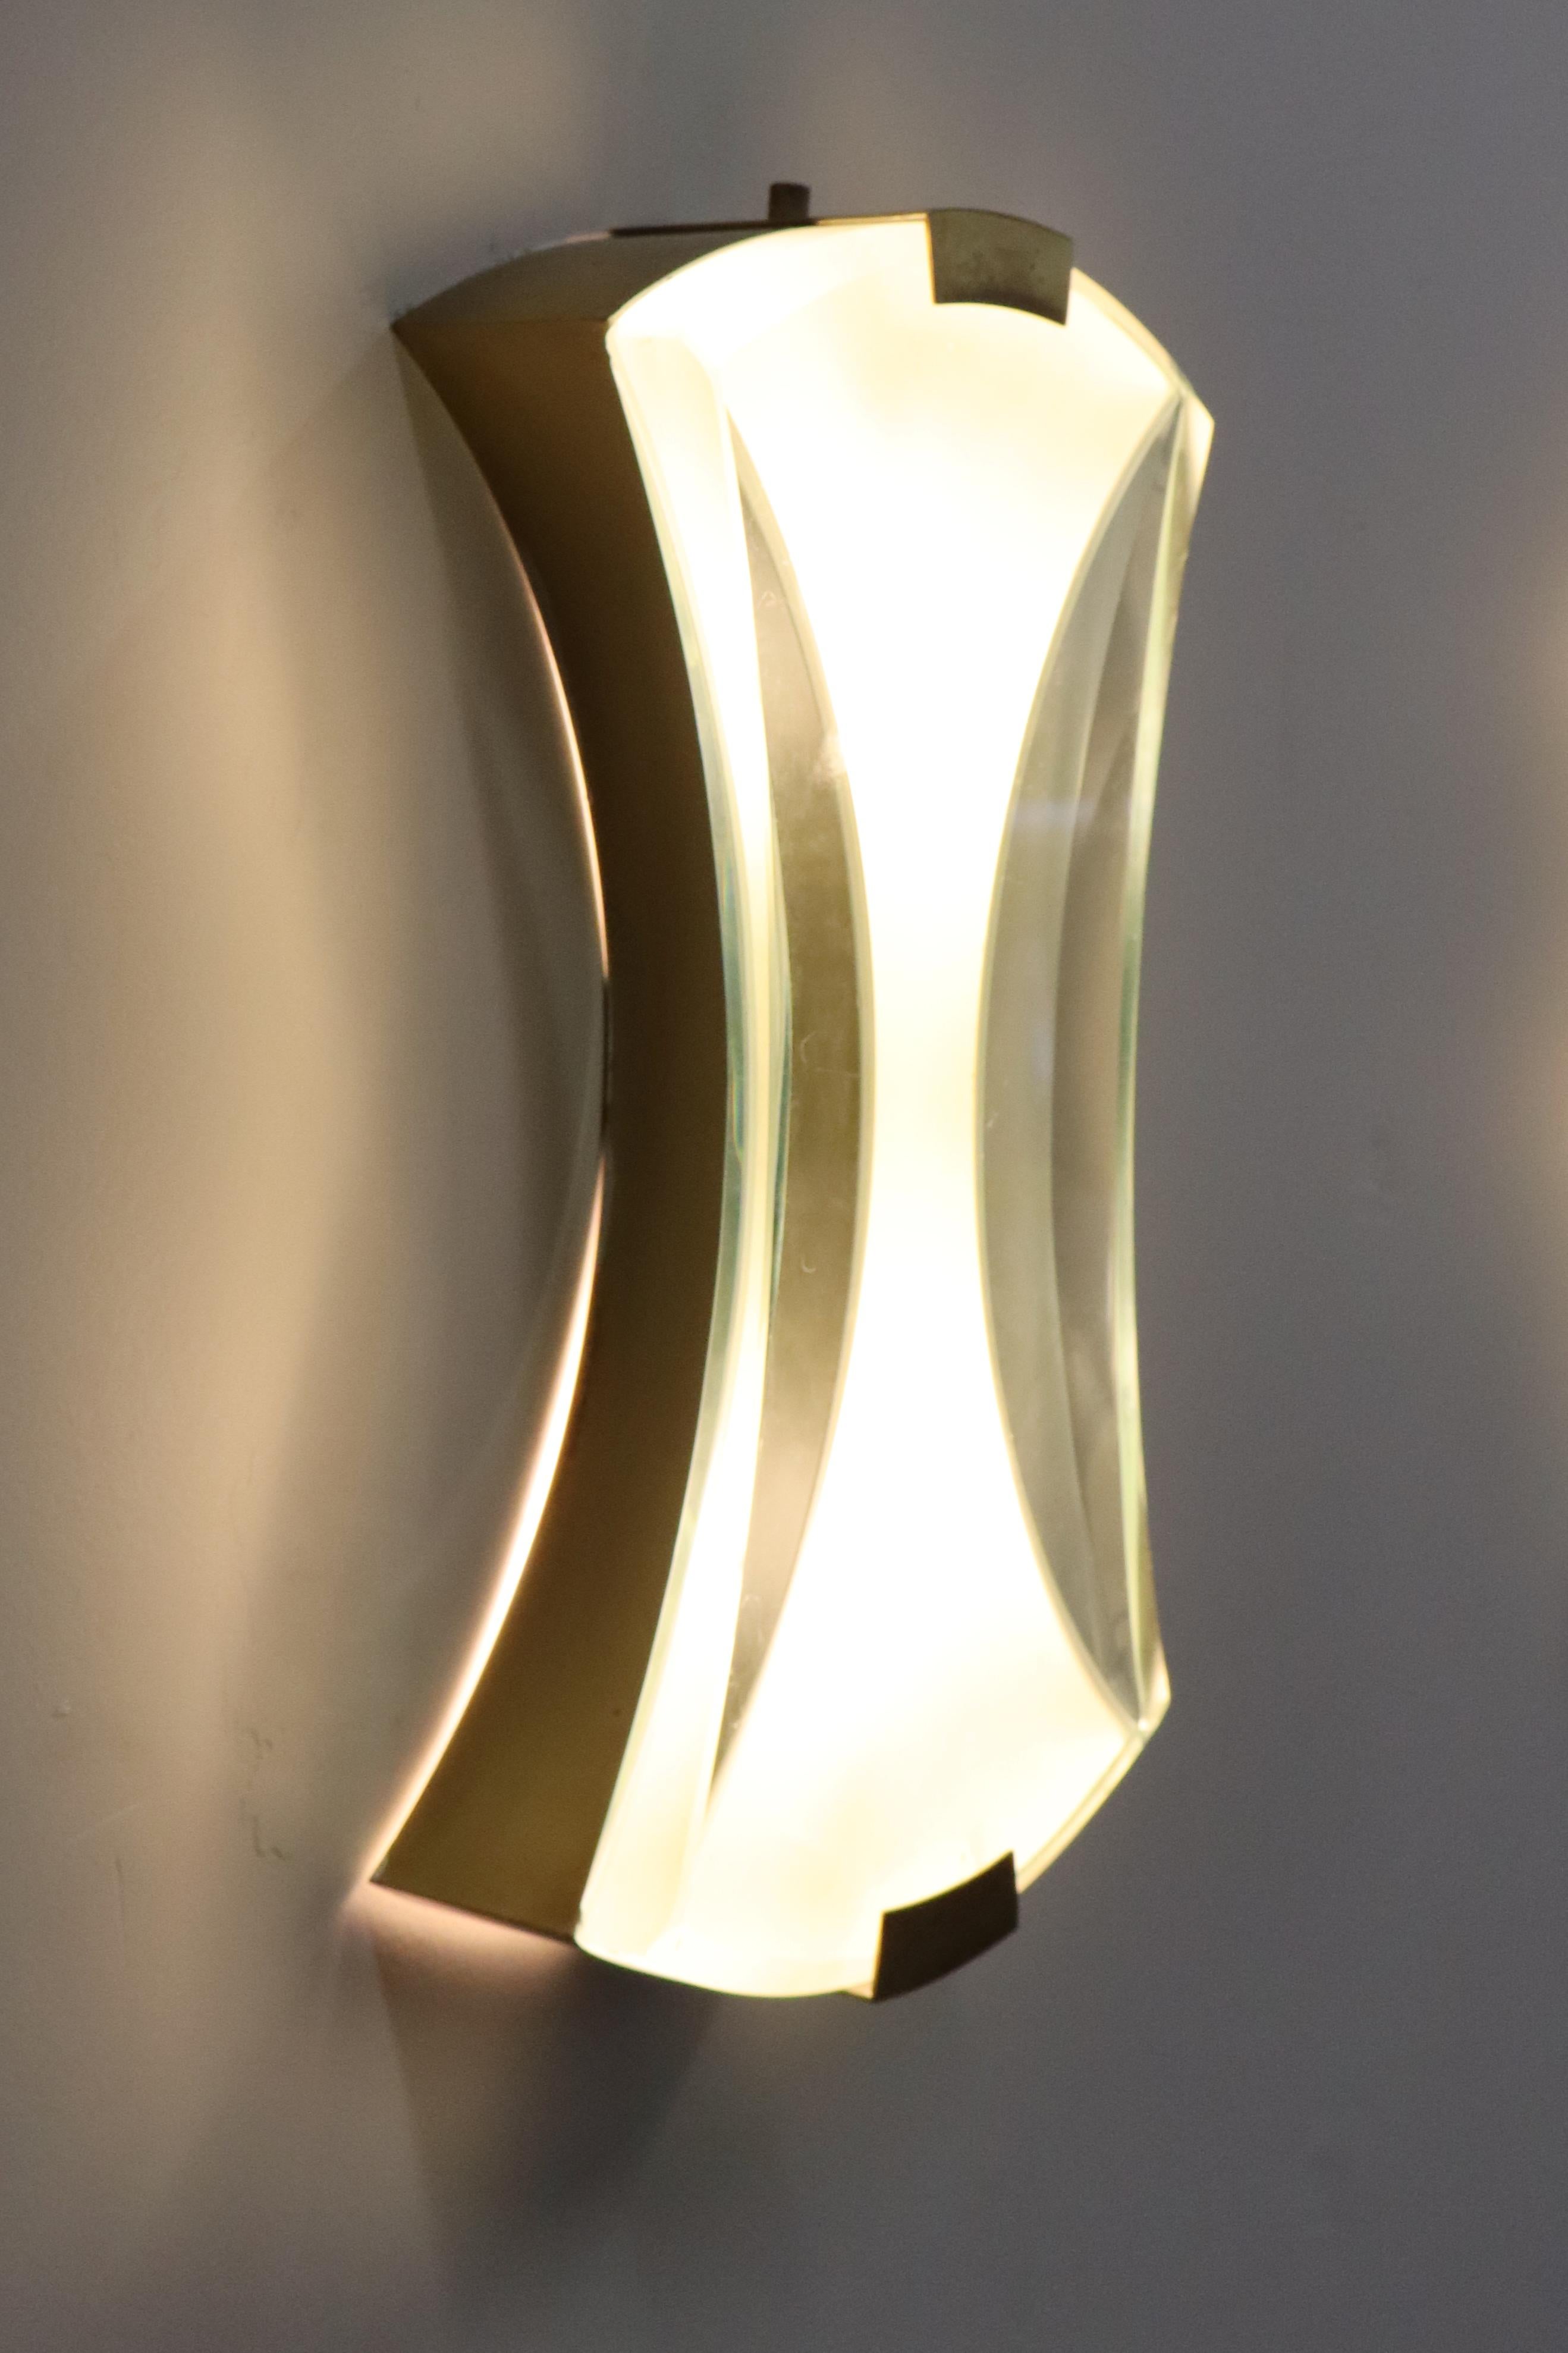 Max Ingrand for Fontana Arte rare pair of elegant modernist sconces model 2225 with central satin or acid-etched glass and outer clear polished glass suspended by brass fittings.
Franco Deboni, Fontana Arte: Gio Ponti, Pietro Chiesa, Max Ingrand,